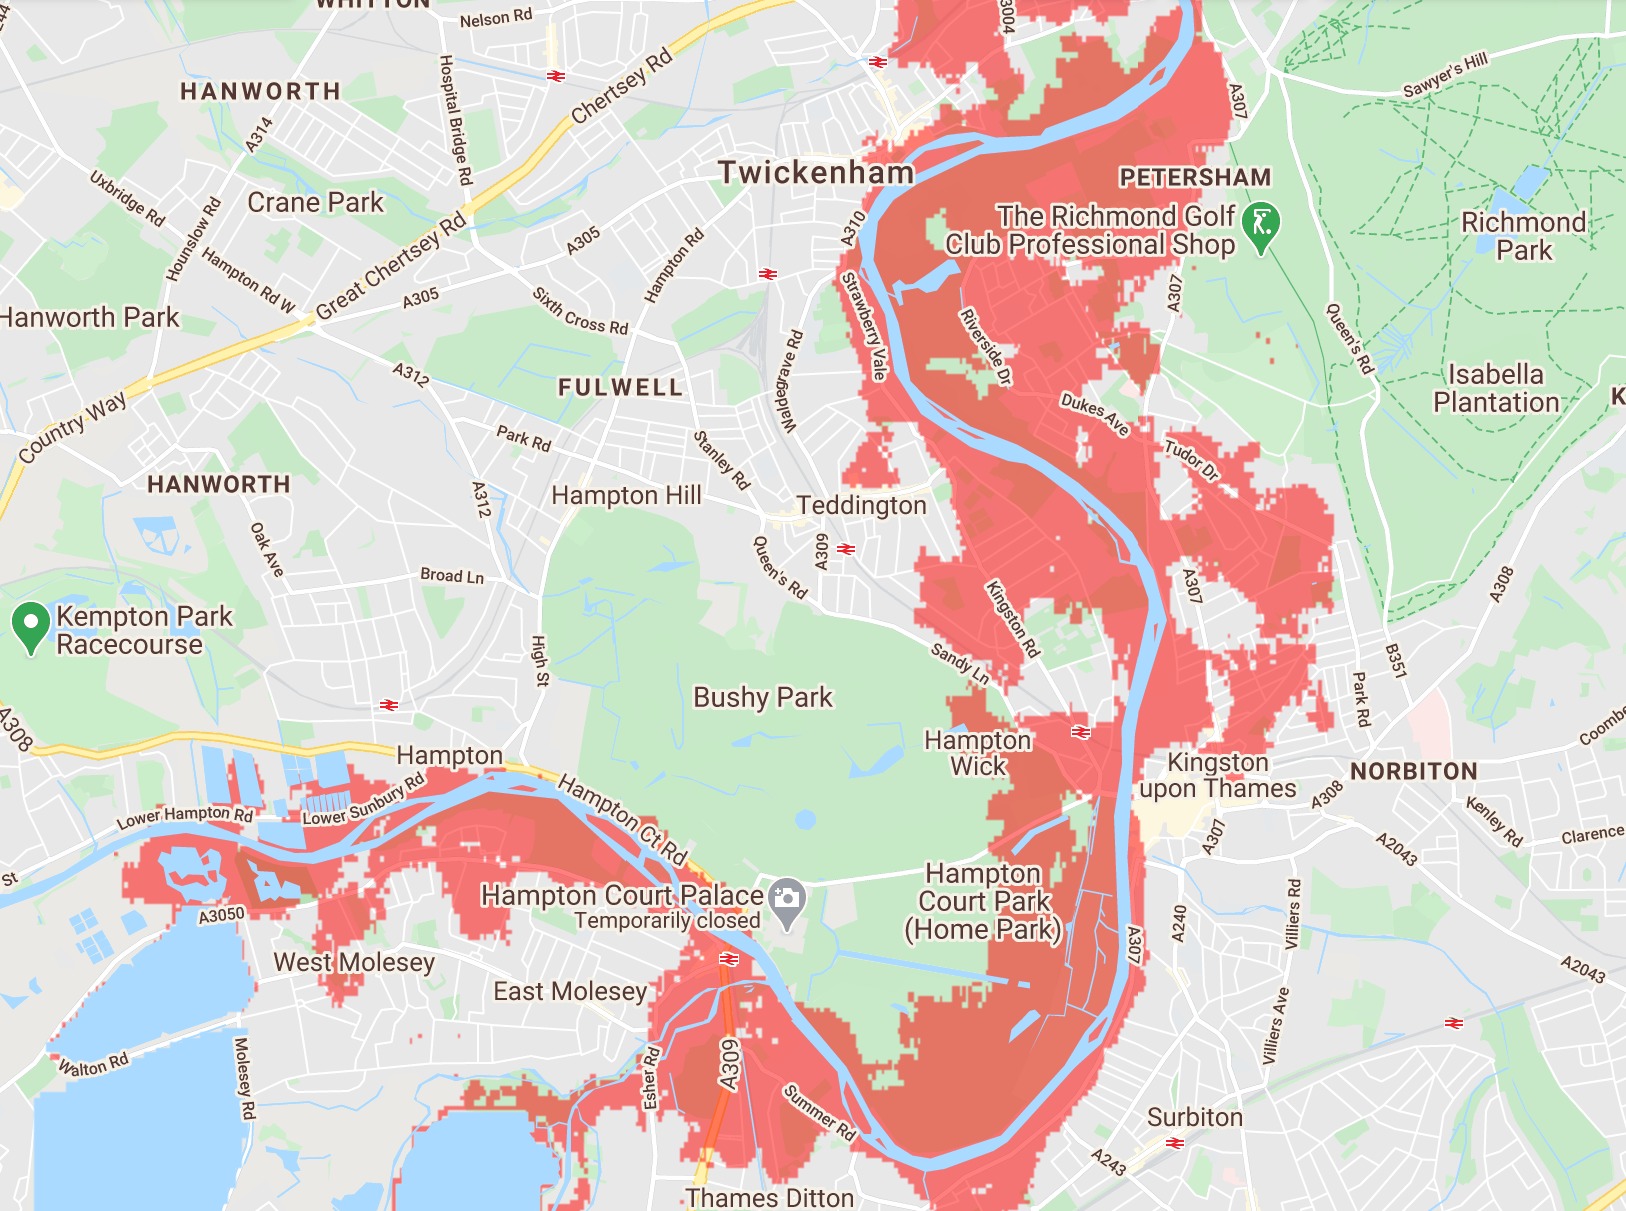 How parts of south London appear on the map. Picture: Climate Central